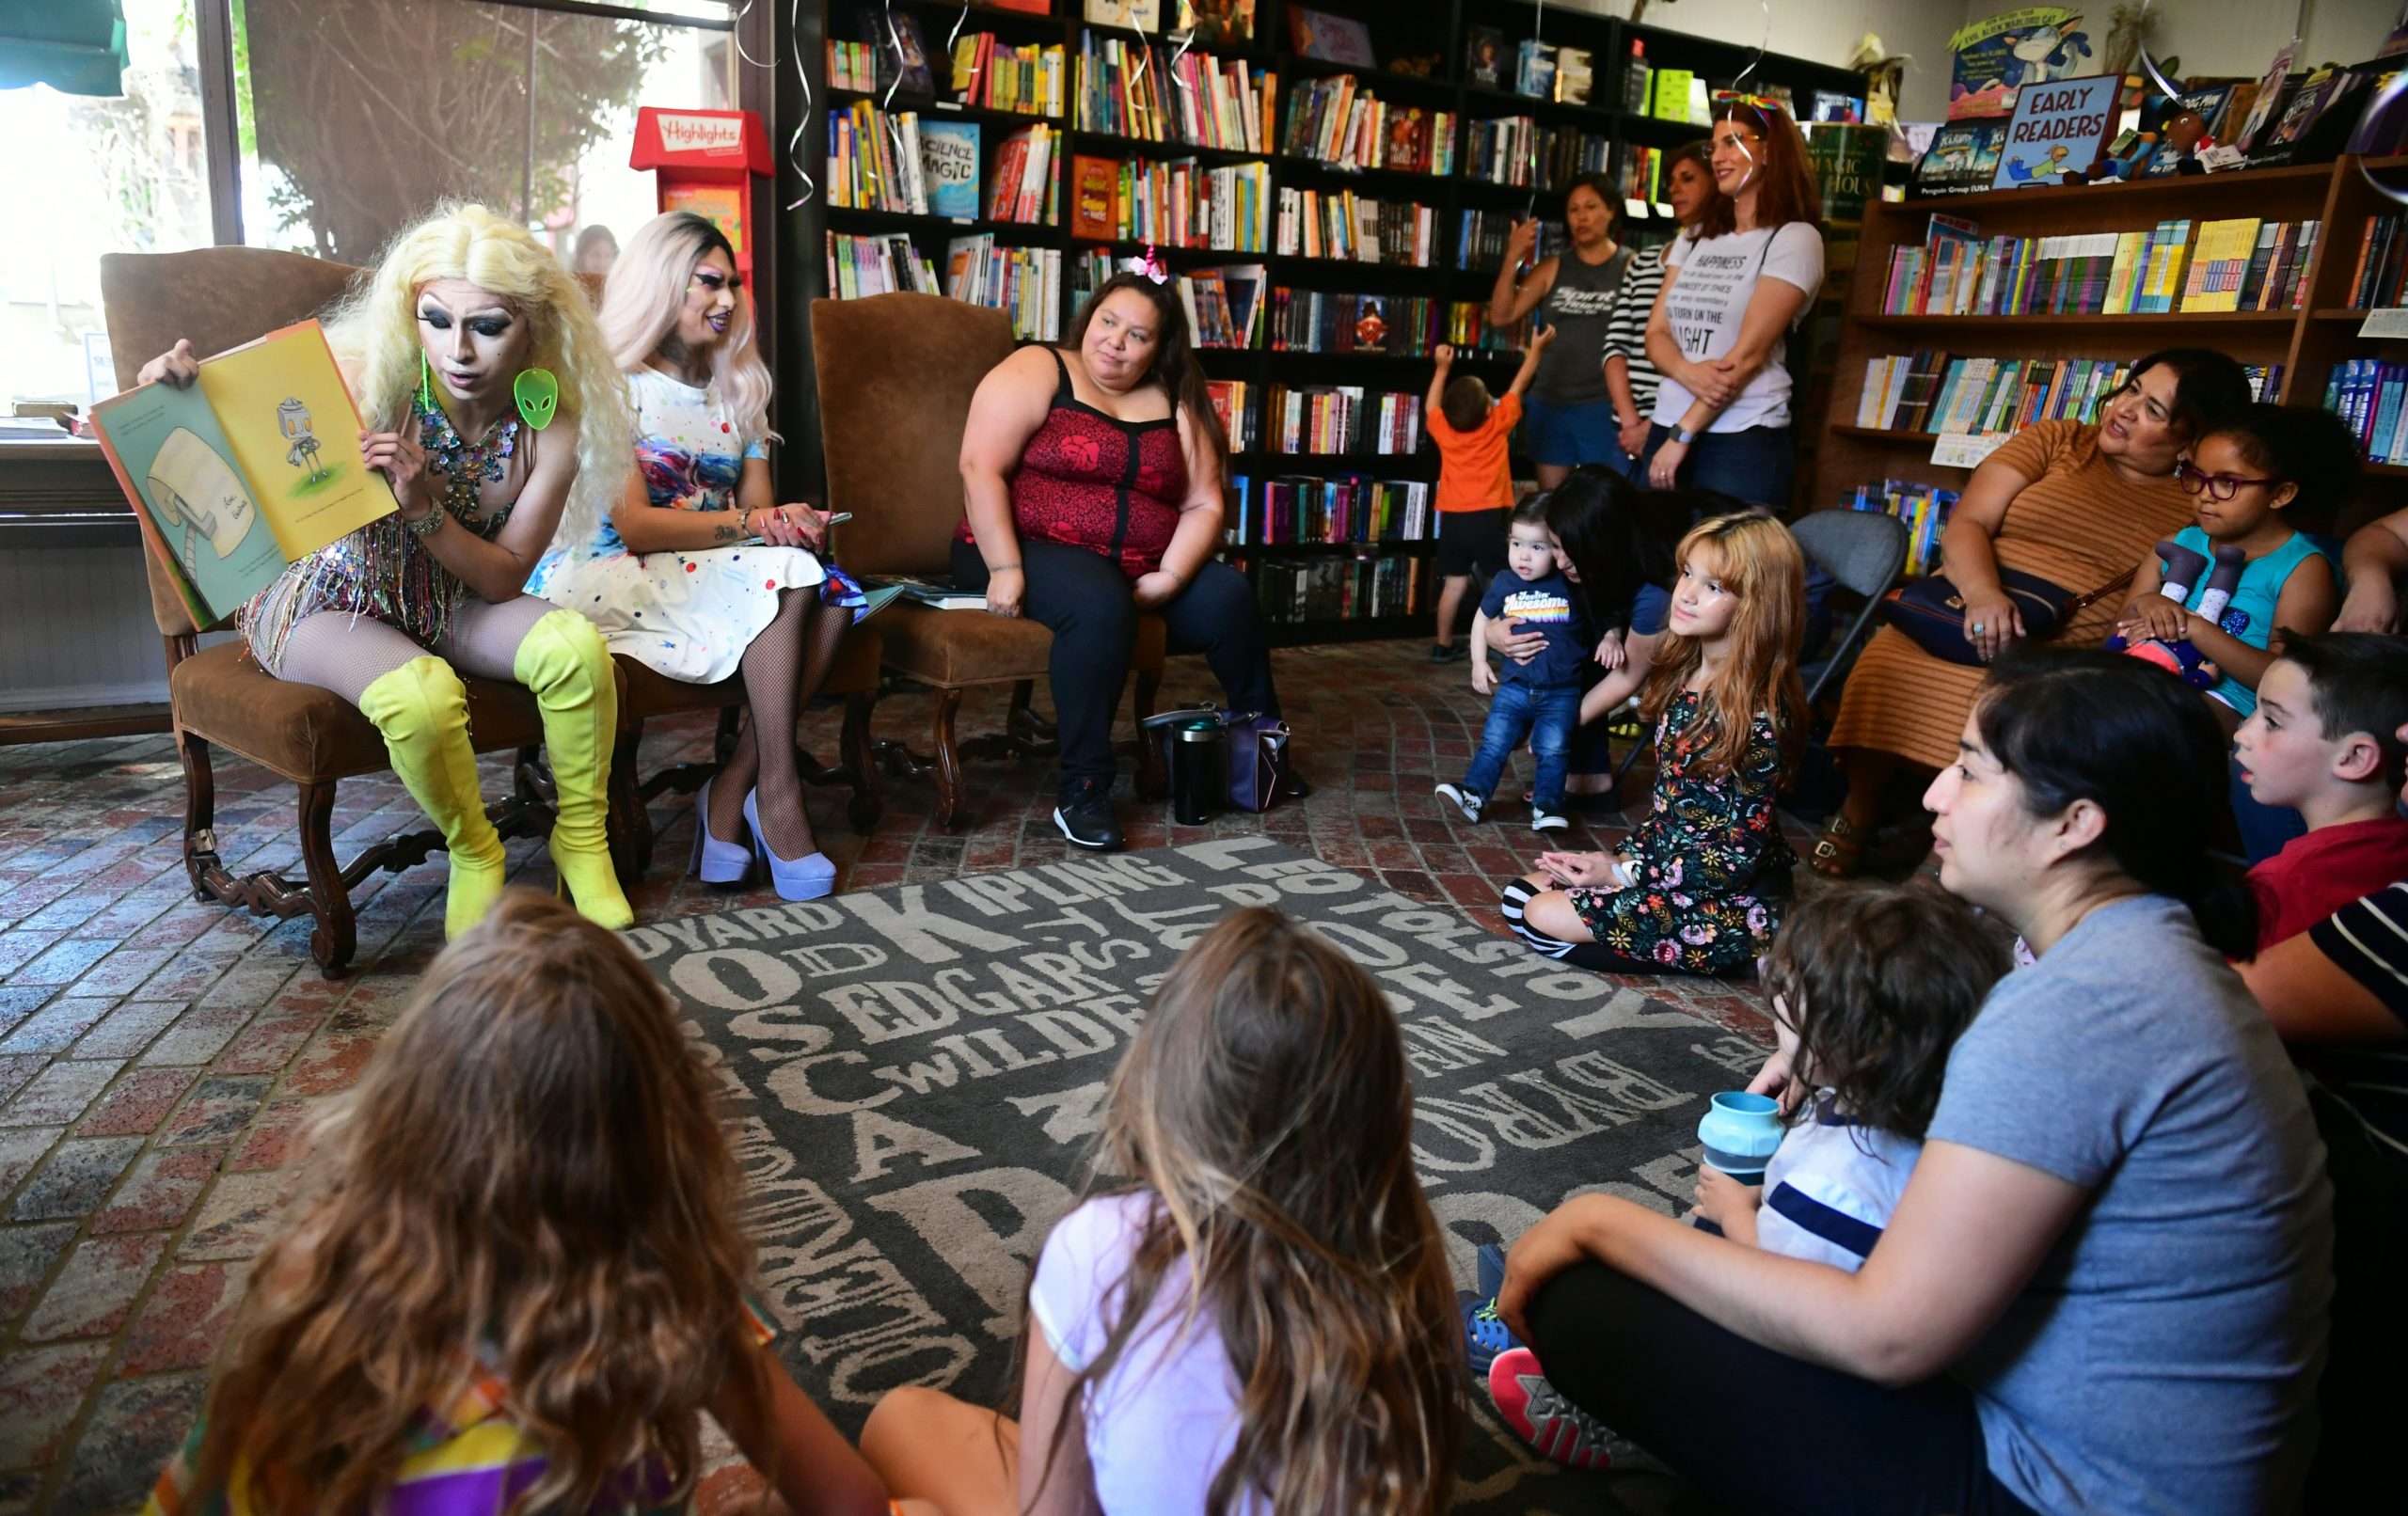 Drag queen Athena Kills (L) reads seated beside Scalene Onixxx to adults and children during Drag Queen Story Hour at Cellar Door Books in Riverside, California on June 22, 2019. - Athena and Scalene, their long blonde hair flowing down to their sequined leotards and rainbow dresses, are reading to around 15 children at a bookstore in Riverside. The scene would be unremarkable -- except that they are both drag queens. The reading workshop is part of "Drag Queen Story Hour," an initiative launched in 2015 by a handful of libraries and schools across the United States. (Photo by Frederic J. BROWN / AFP) (Photo credit should read FREDERIC J. BROWN/AFP via Getty Images)